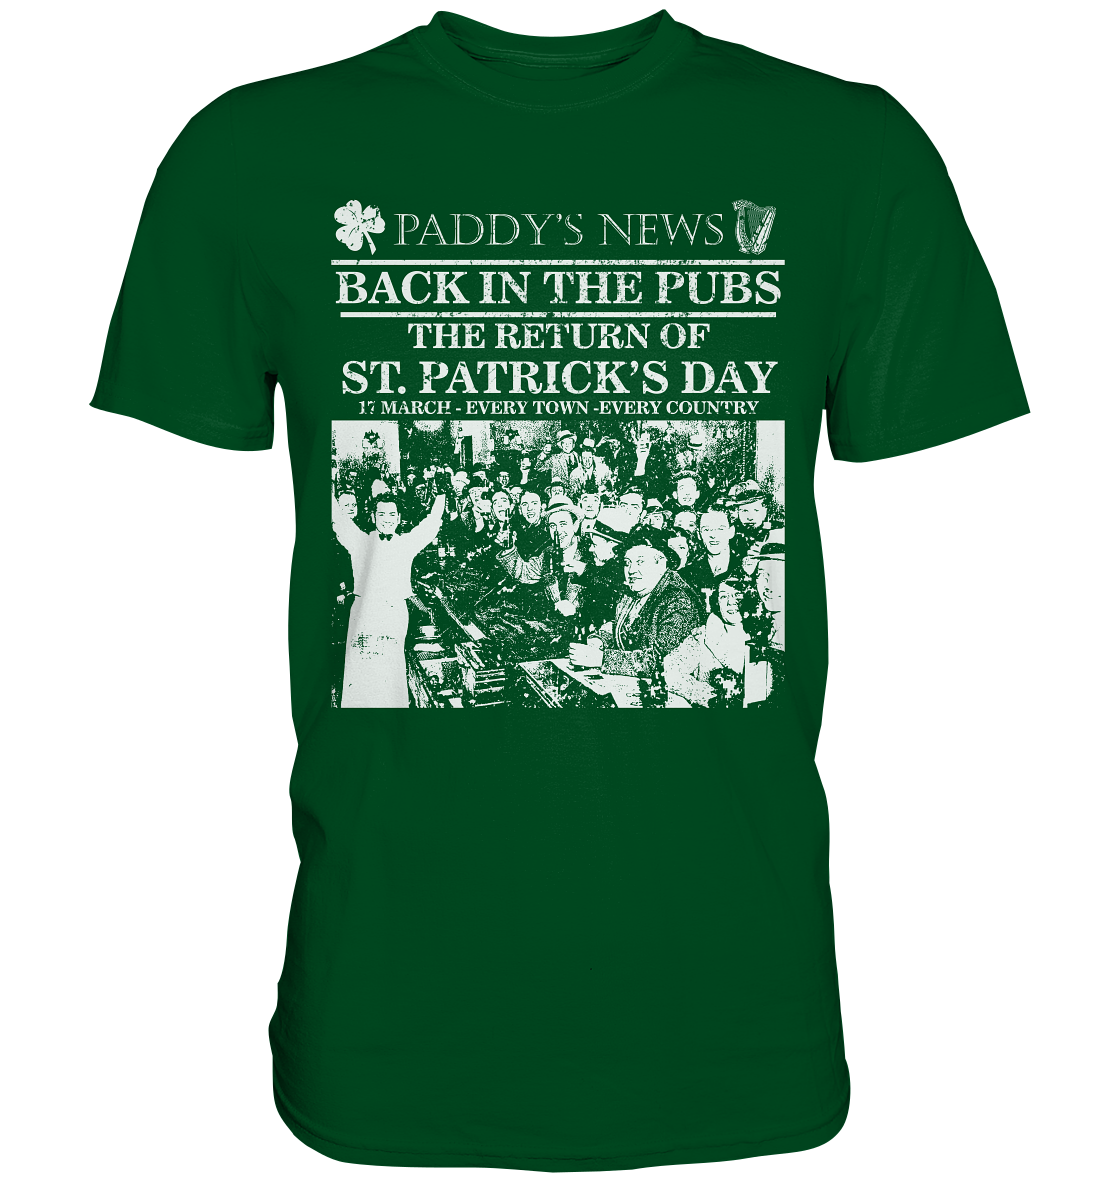 Back In The Pubs "The Return Of St. Patrick's Day" - Premium Shirt